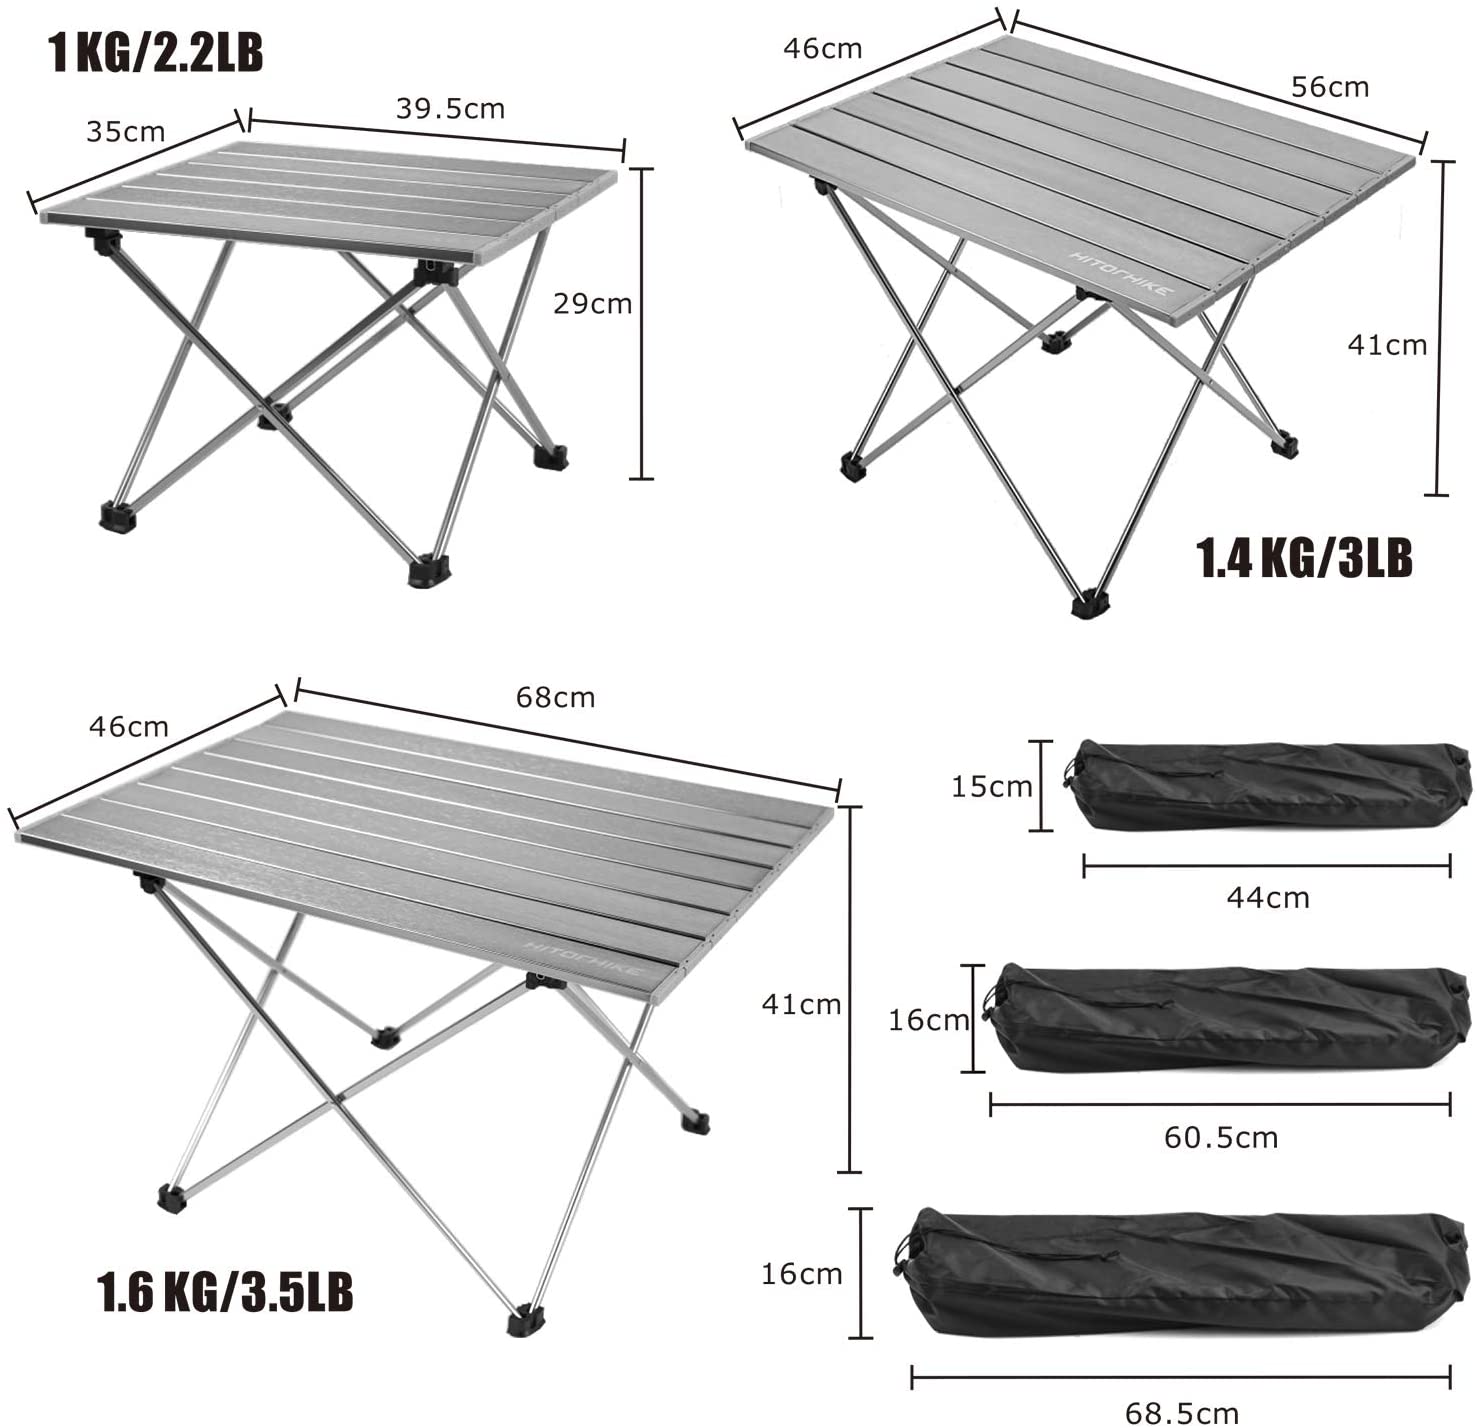 Hitorhike Camping Tables with Aluminum Table Top Ultralight Camp Table with Carry Bag